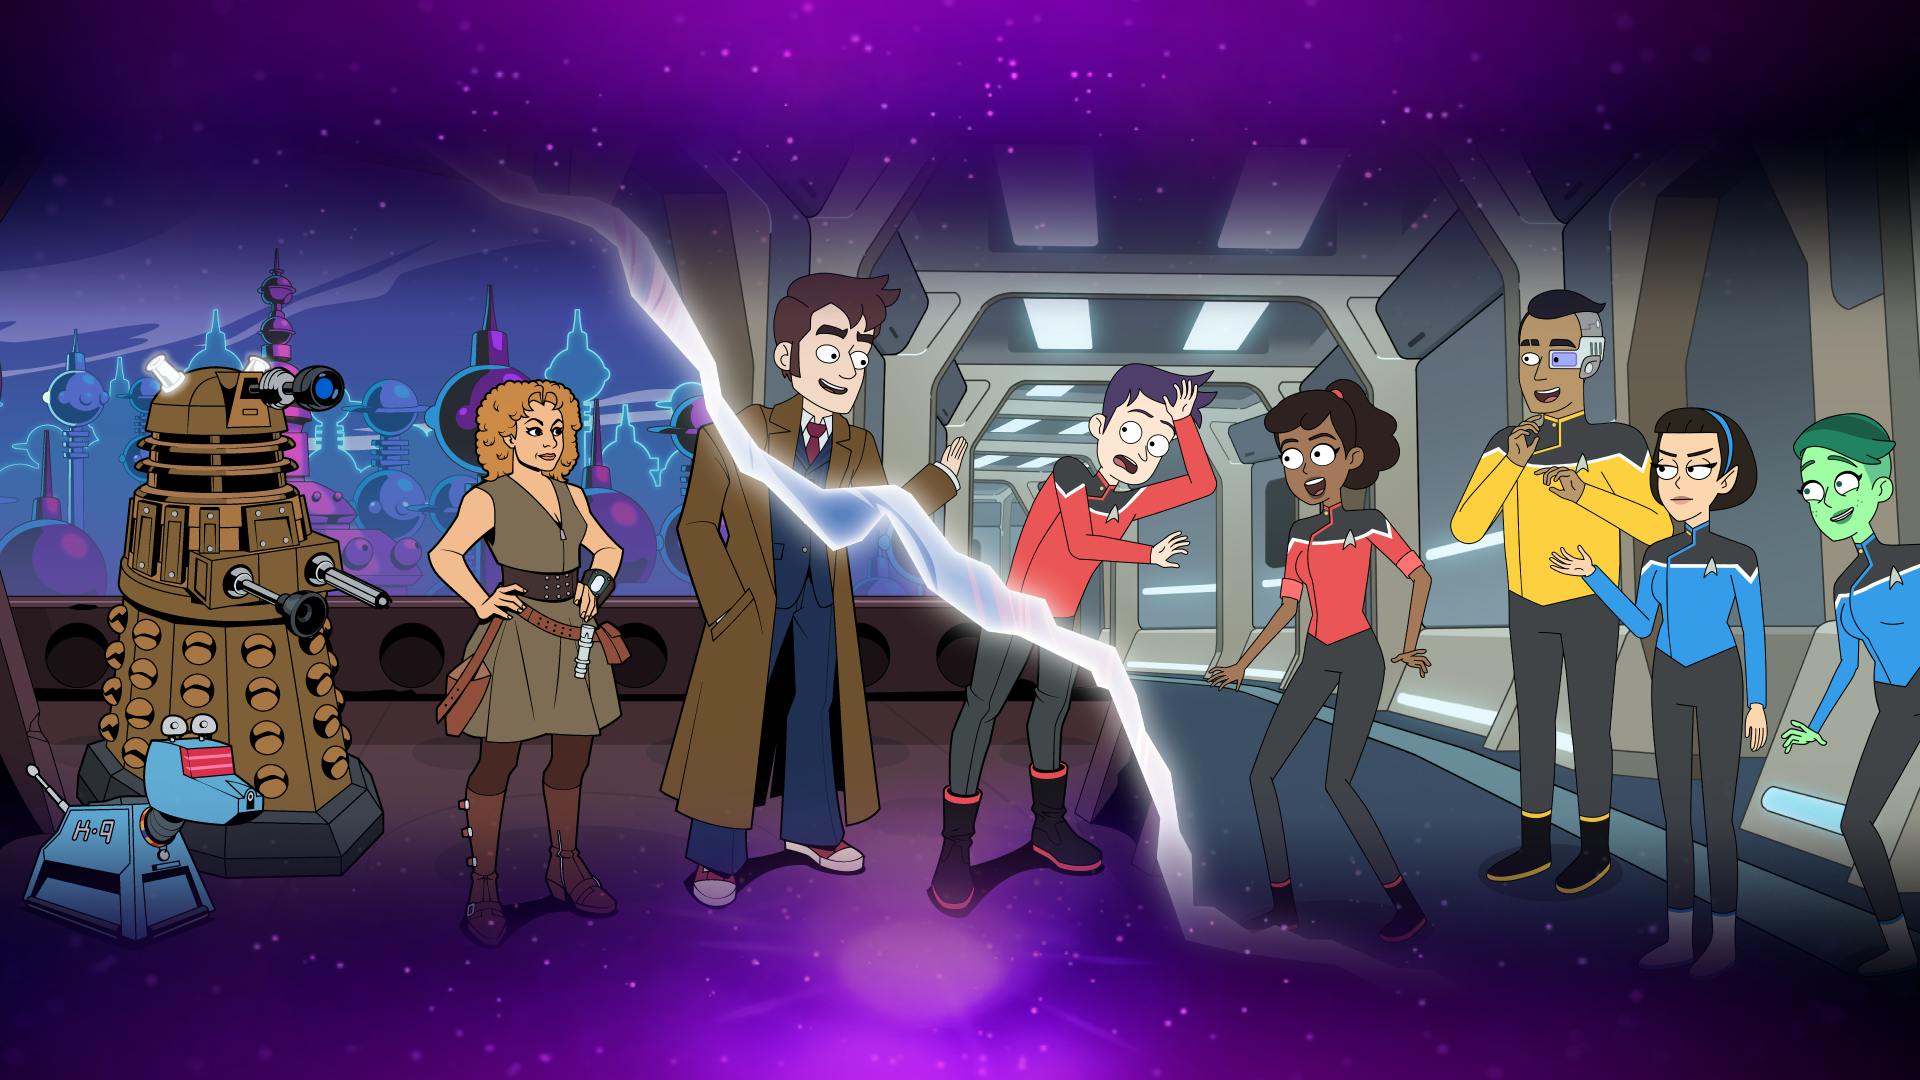 A rift strikes through the Cerritos as the Tenth Doctor approaches a concerned Boimler as K-9, a Dalek, River Song, Mariner, Rutherford, T'Lyn, and Tendi look on